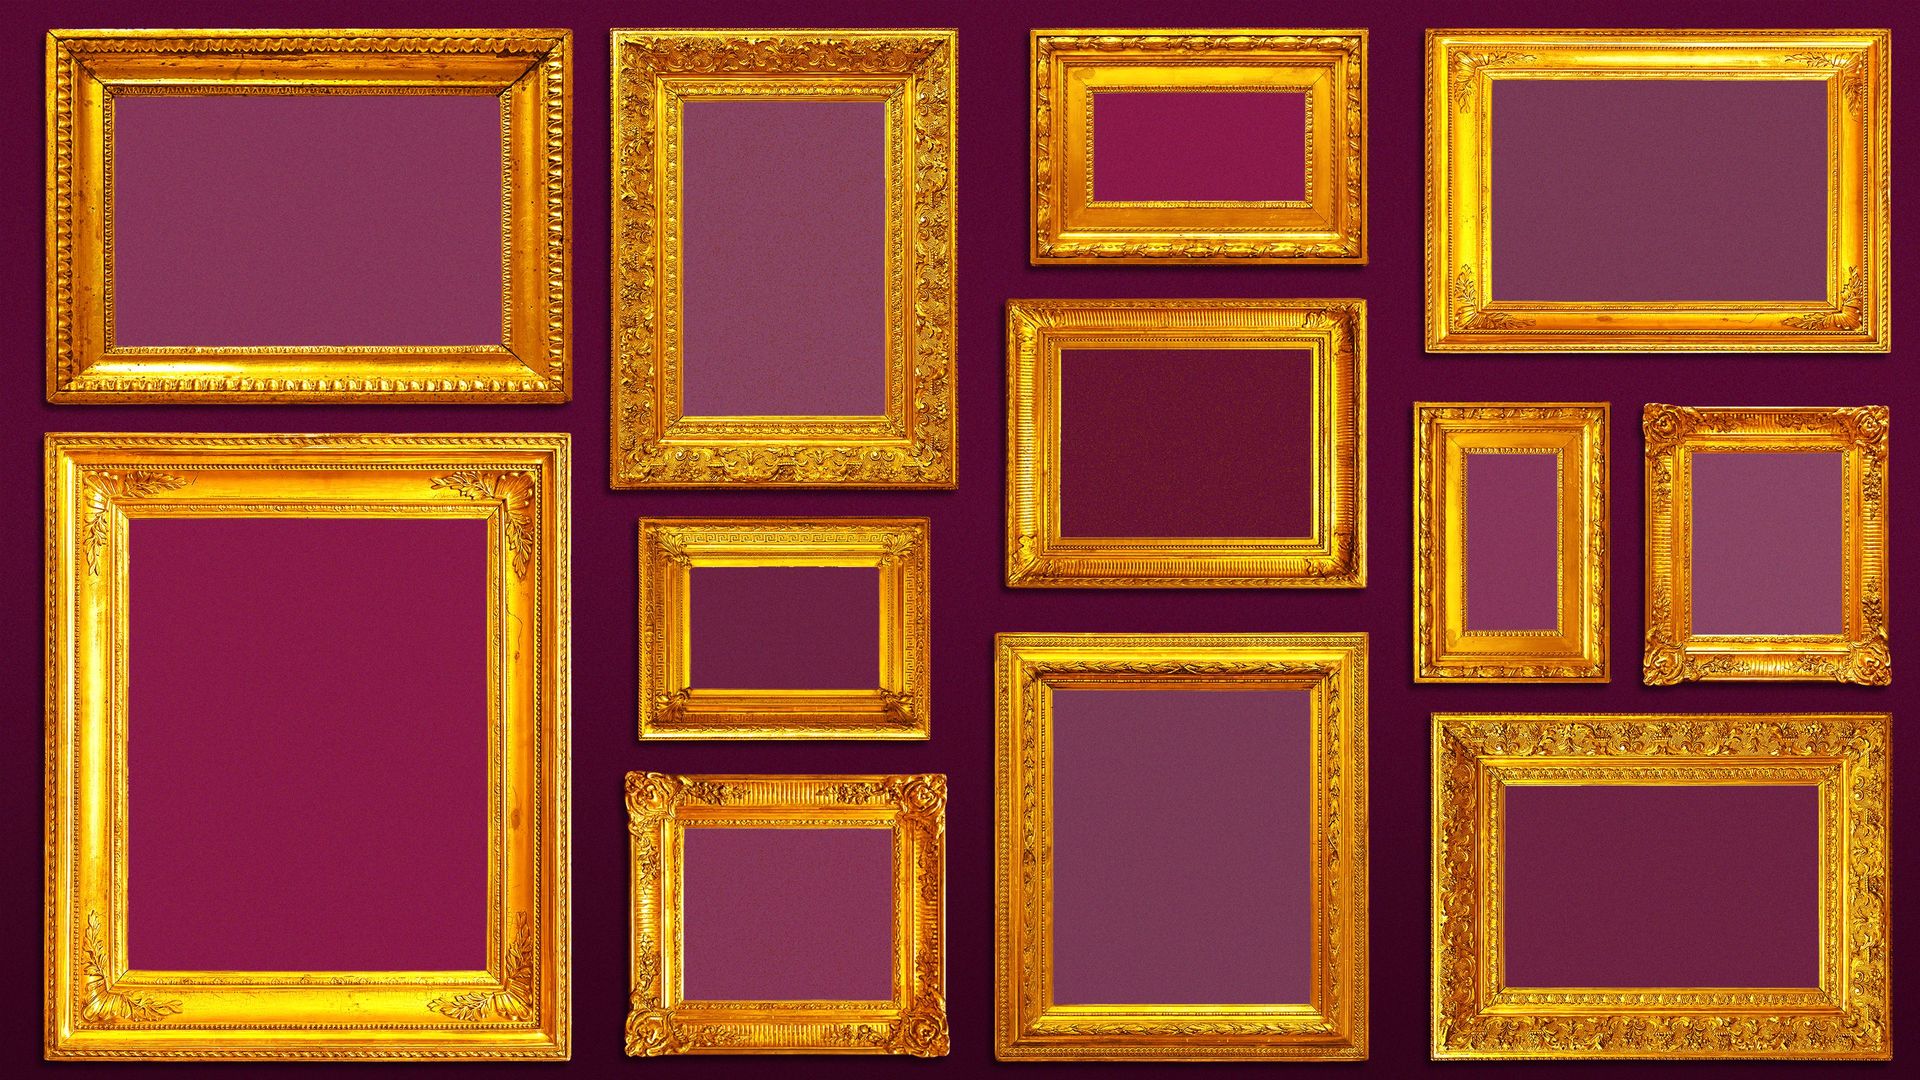 Illustration of a several frames arranged galley wall style.